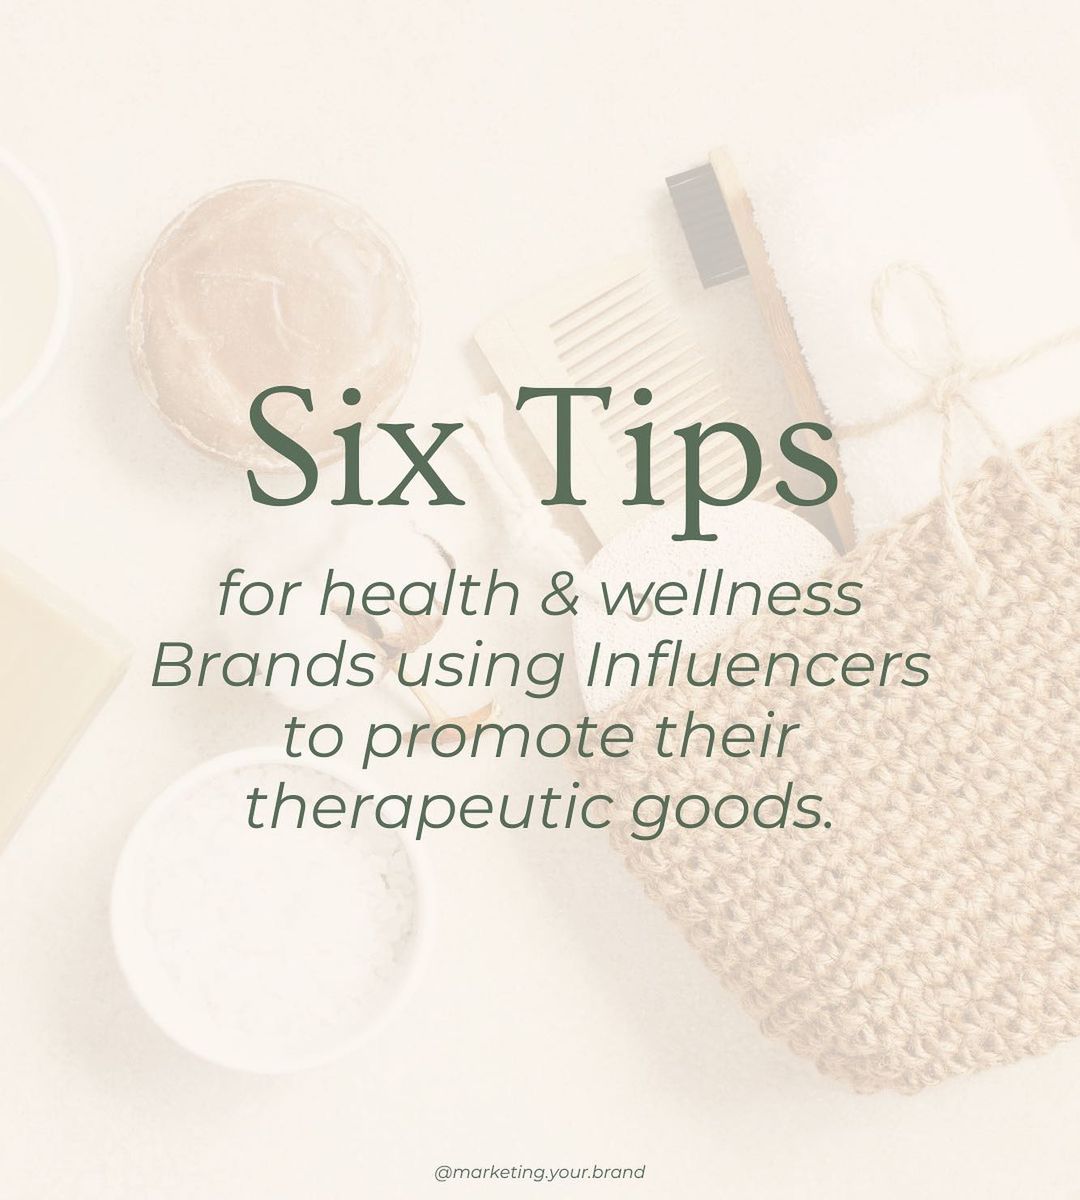 6 Tips For Health & Wellness Brands using influencers to promote their therapeutic goods